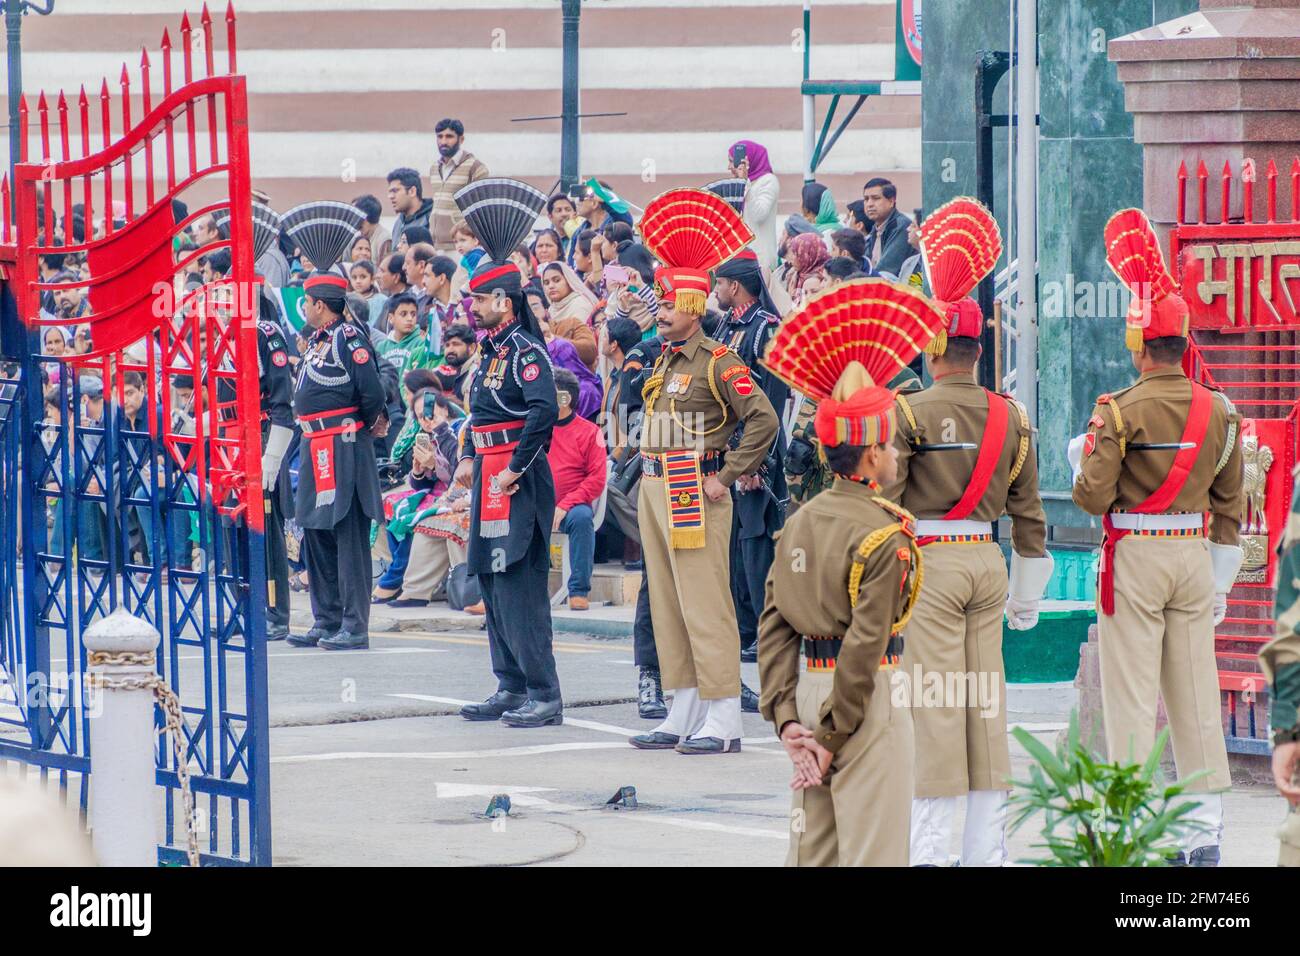 WAGAH, INDIA - JANUARY 26, 2017: Border guards at the military ceremony at India-Pakistan border in Wagah in Punjab, India. Stock Photo